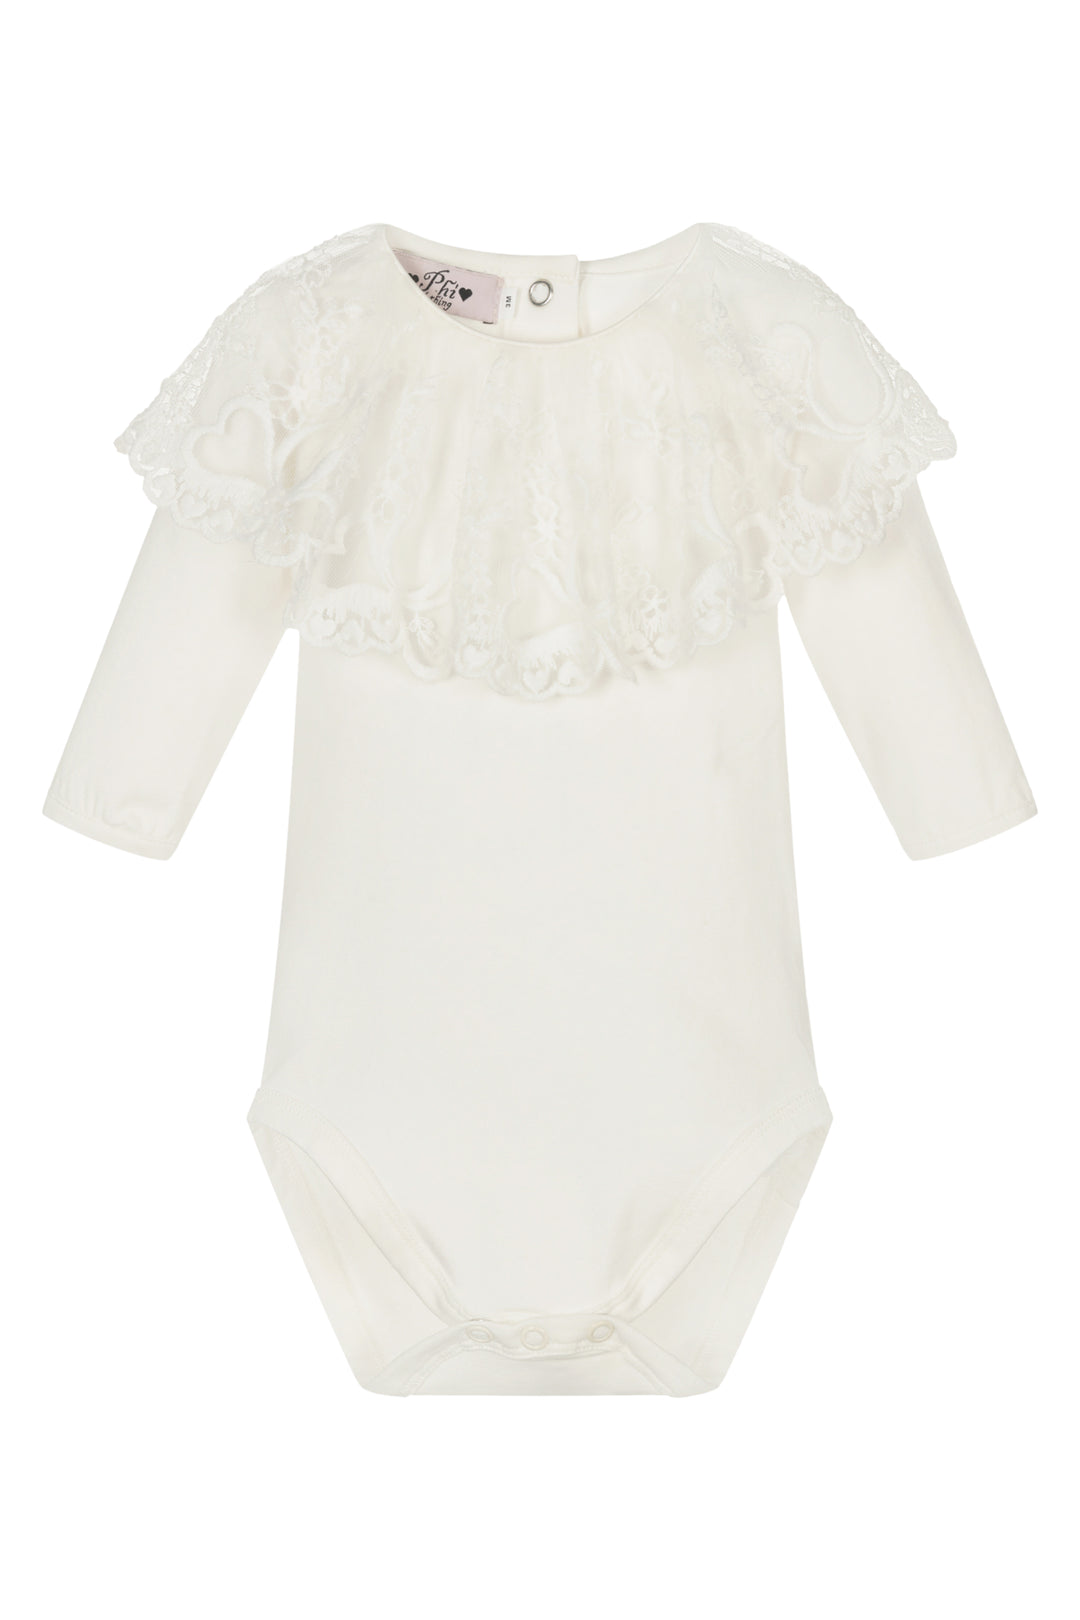 Phi Ivory Vintage Lace Bodysuit/Top | Millie and John